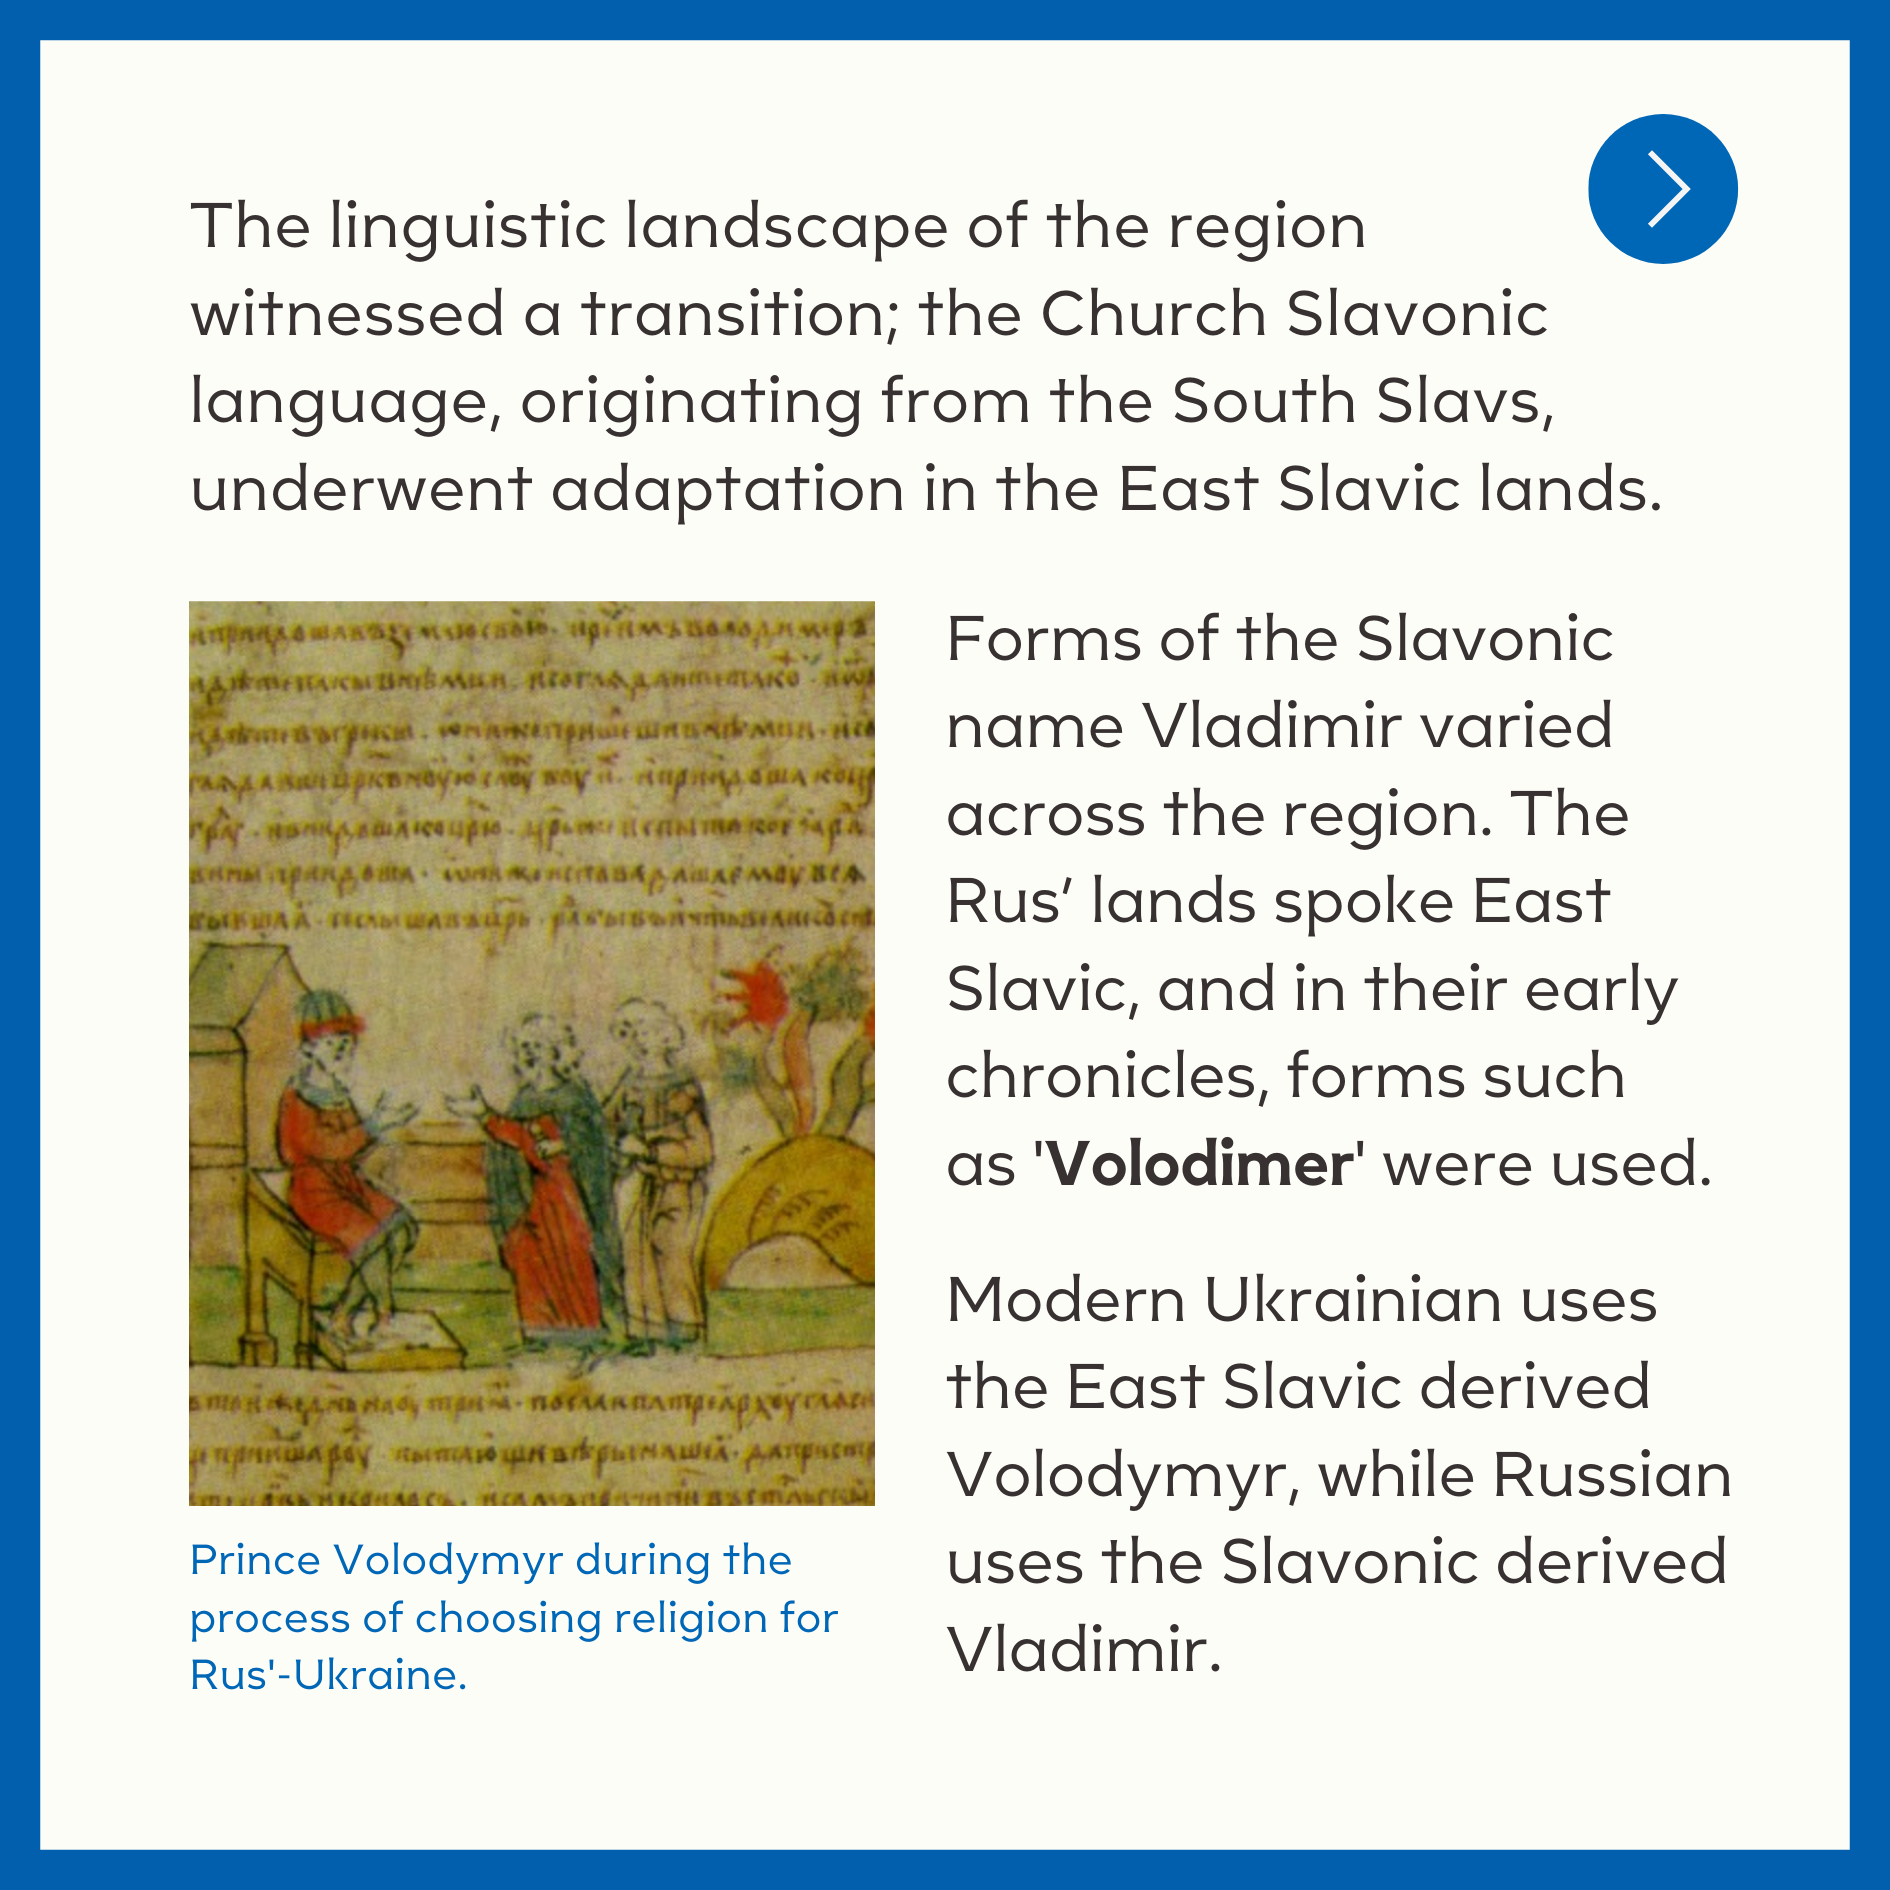  The linguistic landscape of the region witnessed a transition; the Church Slavonic language, originating from the South Slavs, underwent adaptation in the East Slavic lands.   Forms of the Slavonic name Vladimir varied across the region. The Rus’ la